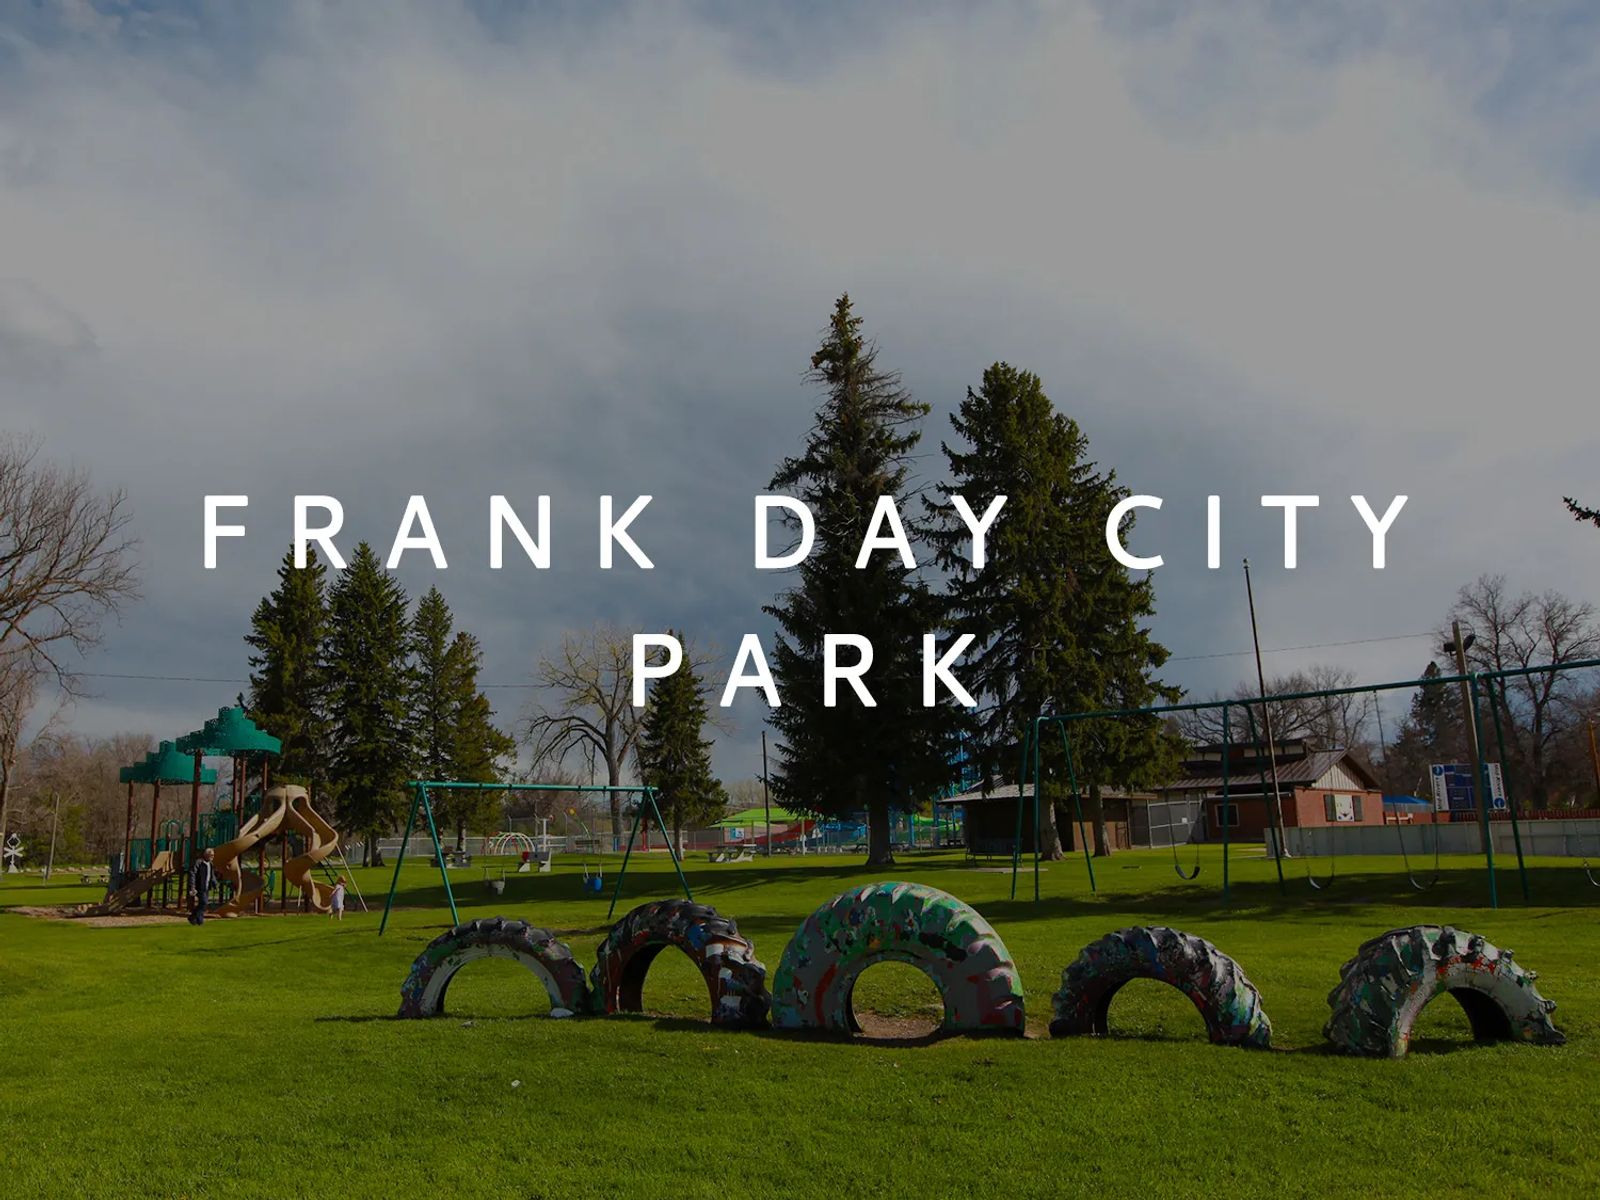 Frank Day City Park in Central Montana